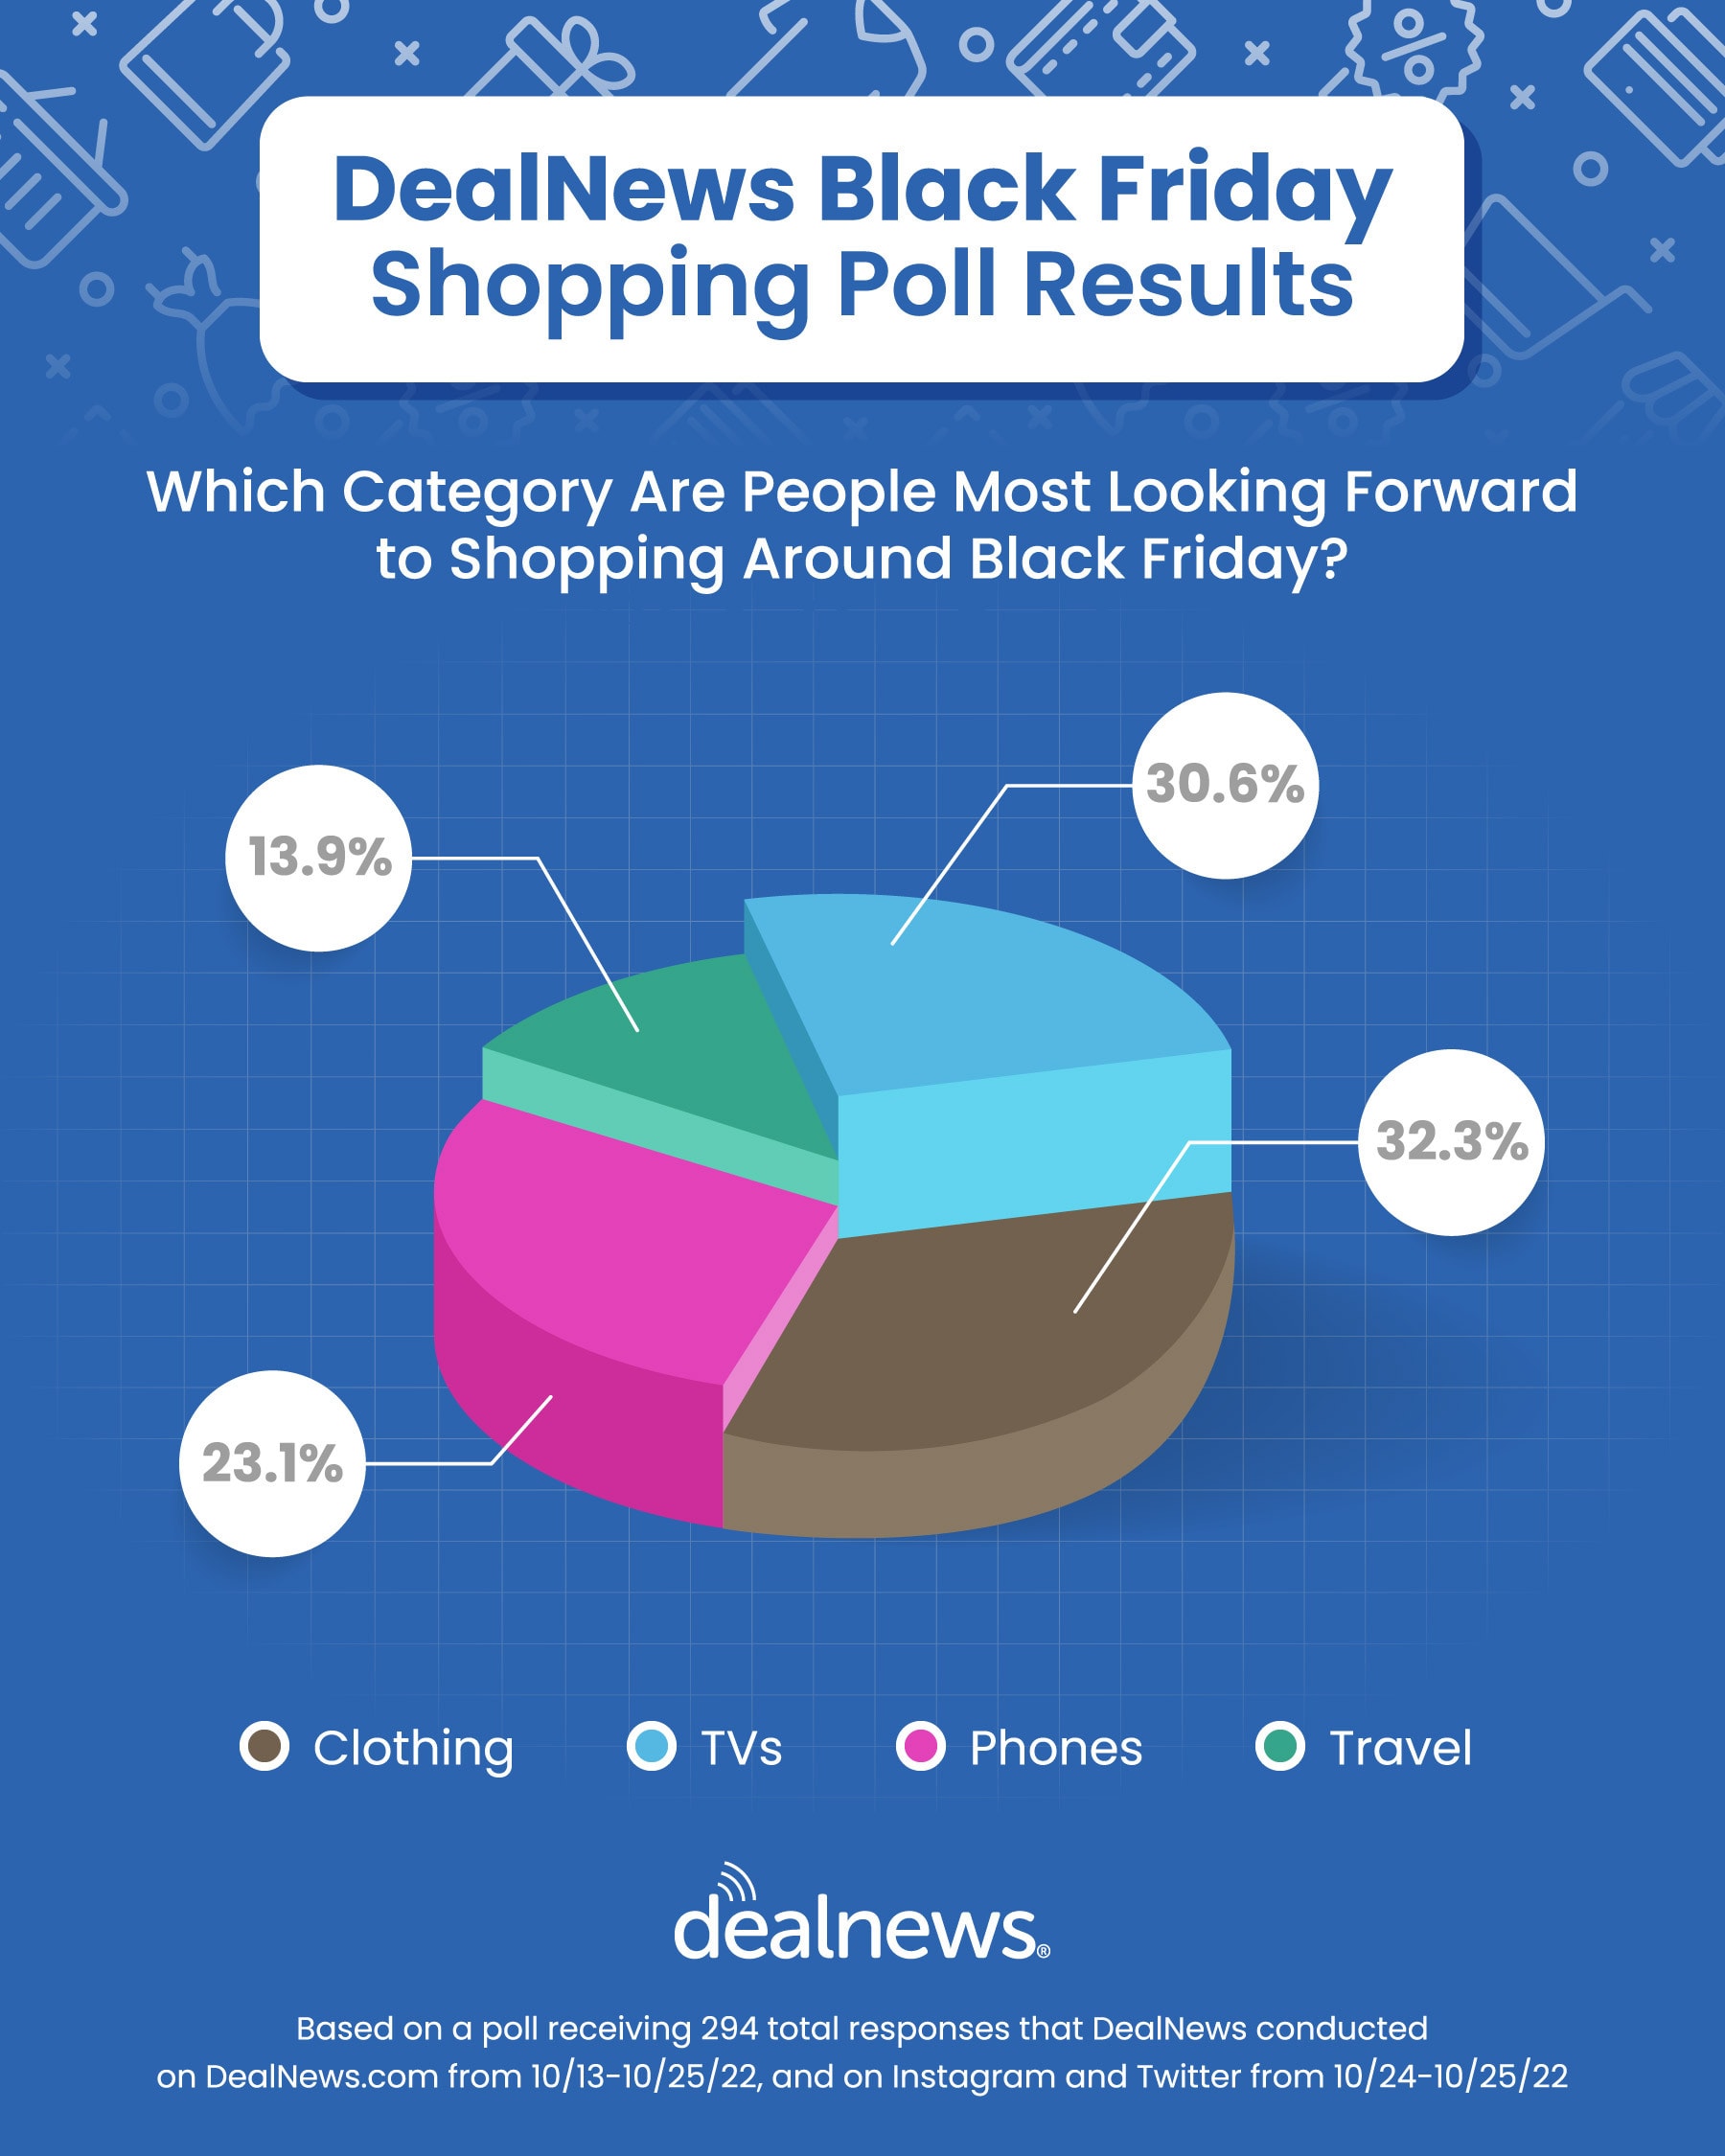 DealNews Black Friday shopping poll results shown in pie chart form.